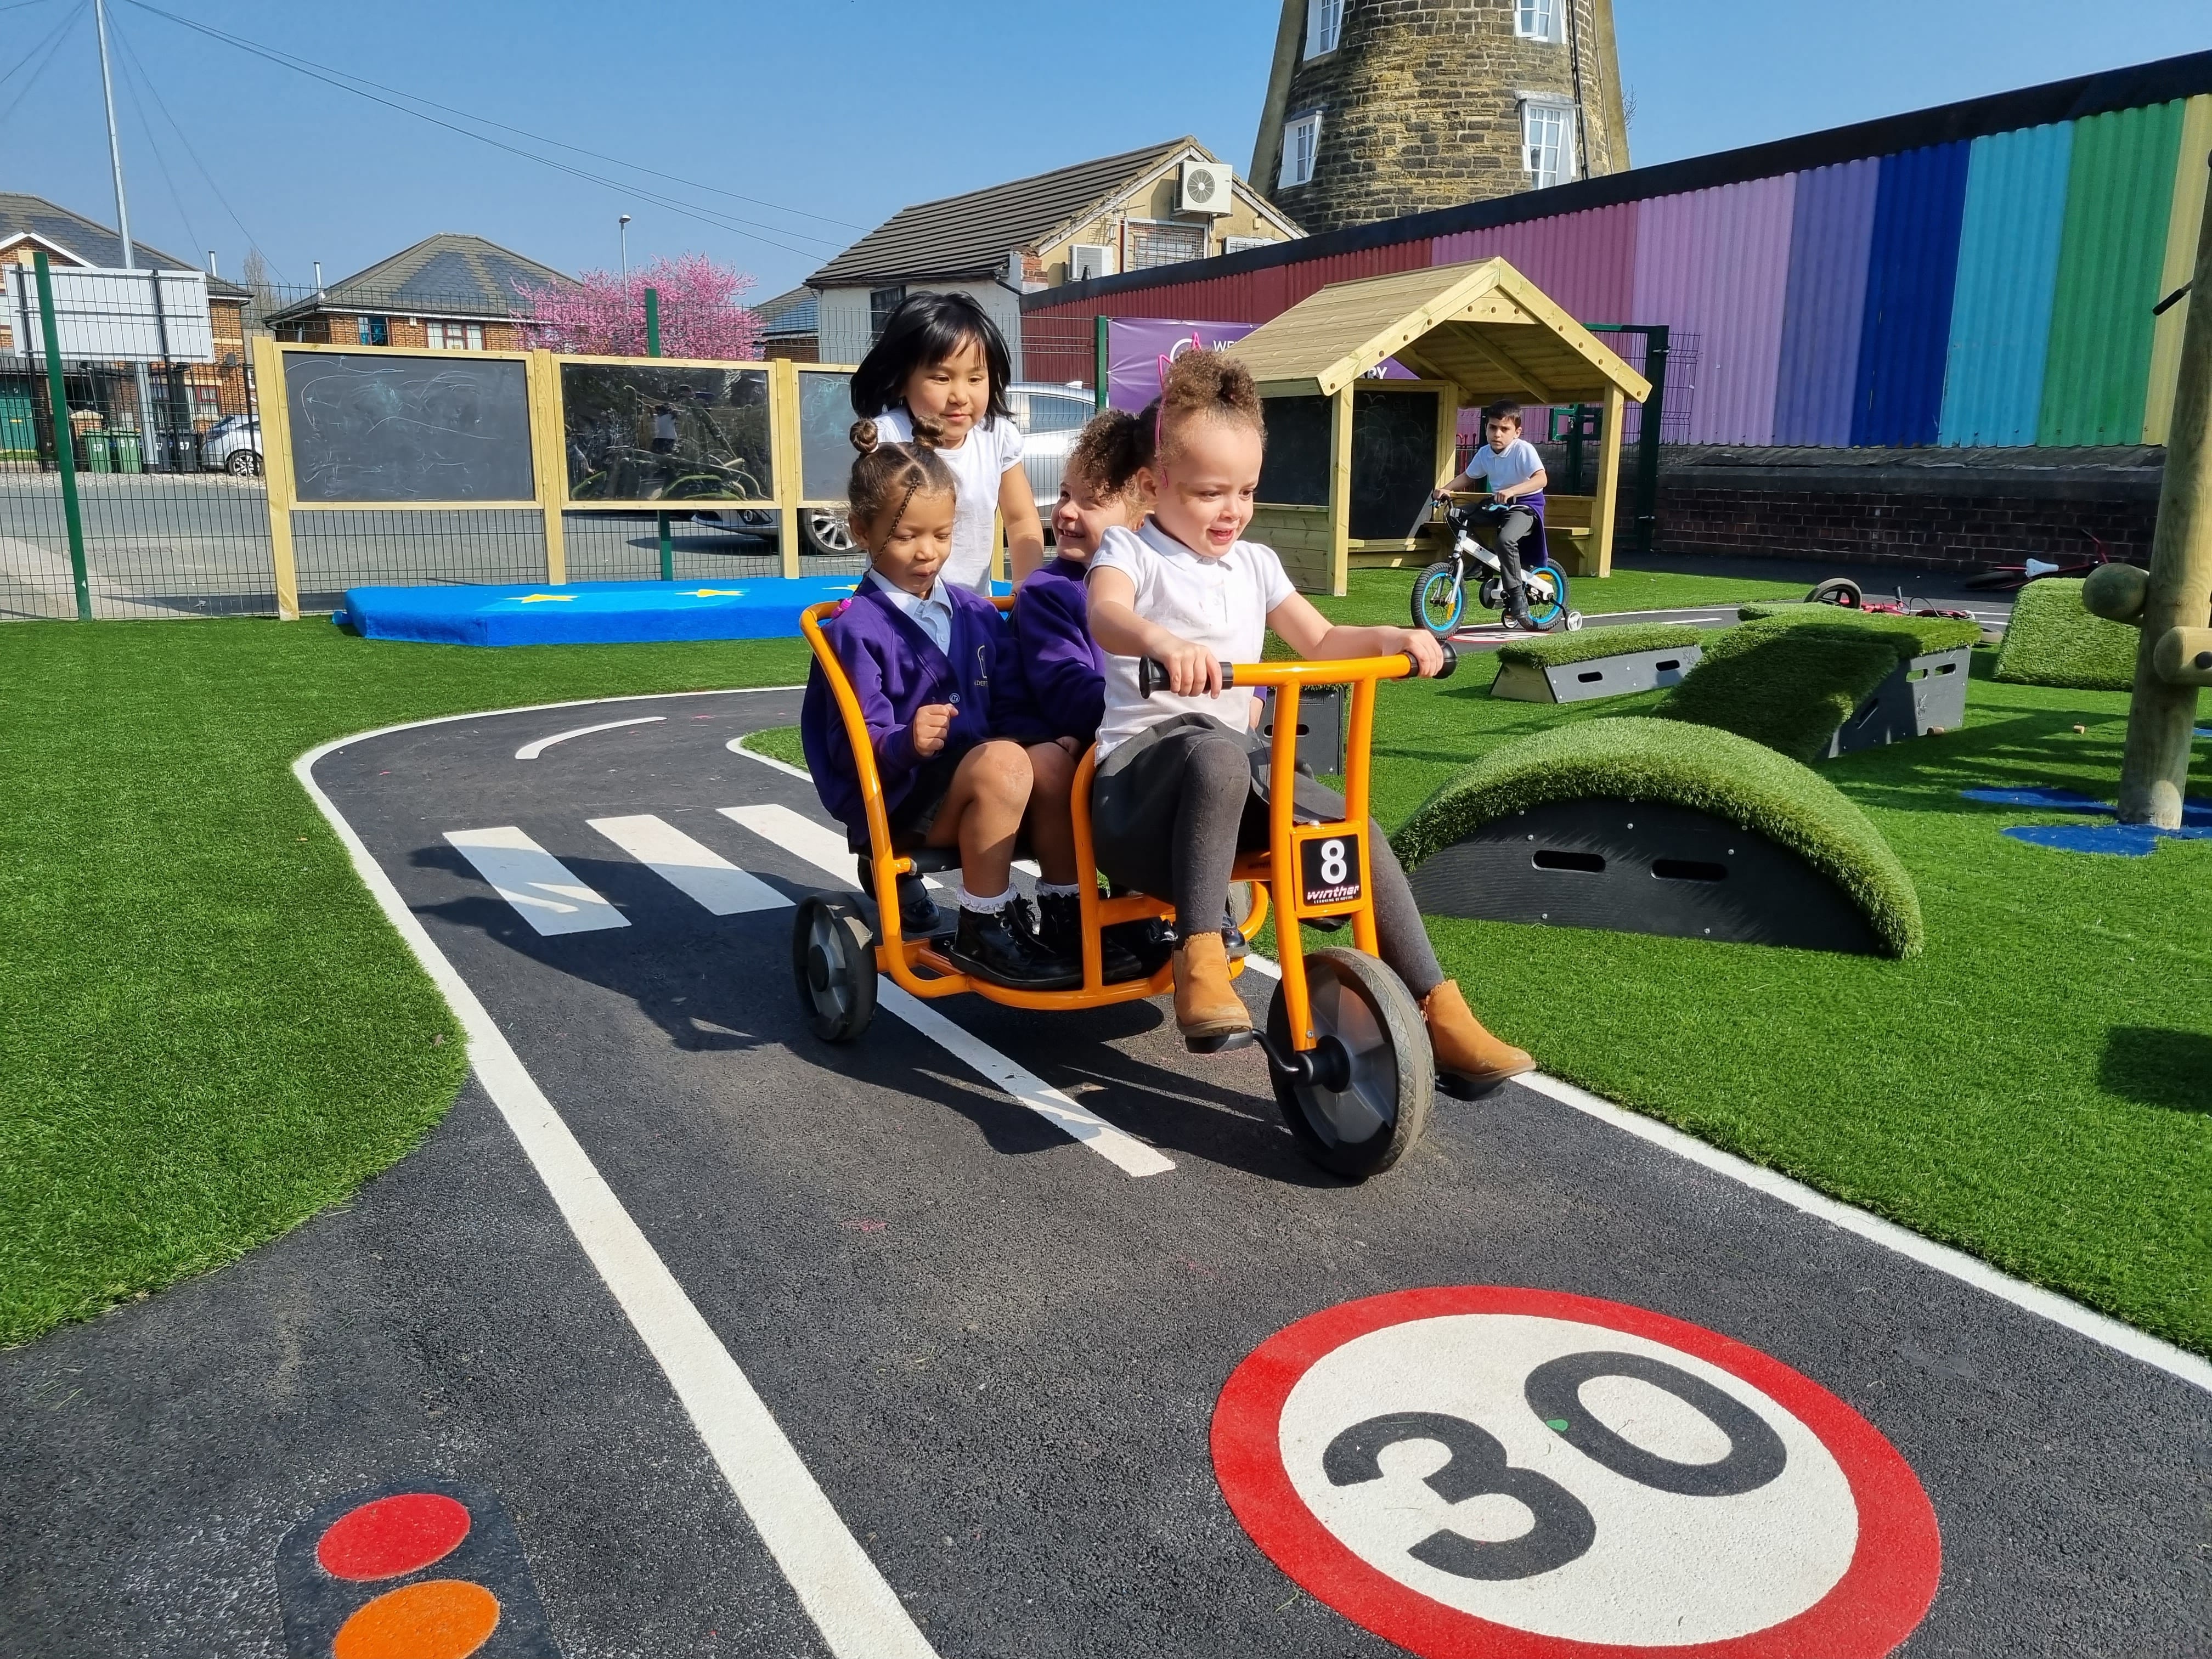 A child is riding a big bike, with 3 children on the back of it. They are riding on top of a road marking for a playground, with a child on another bike in the background.